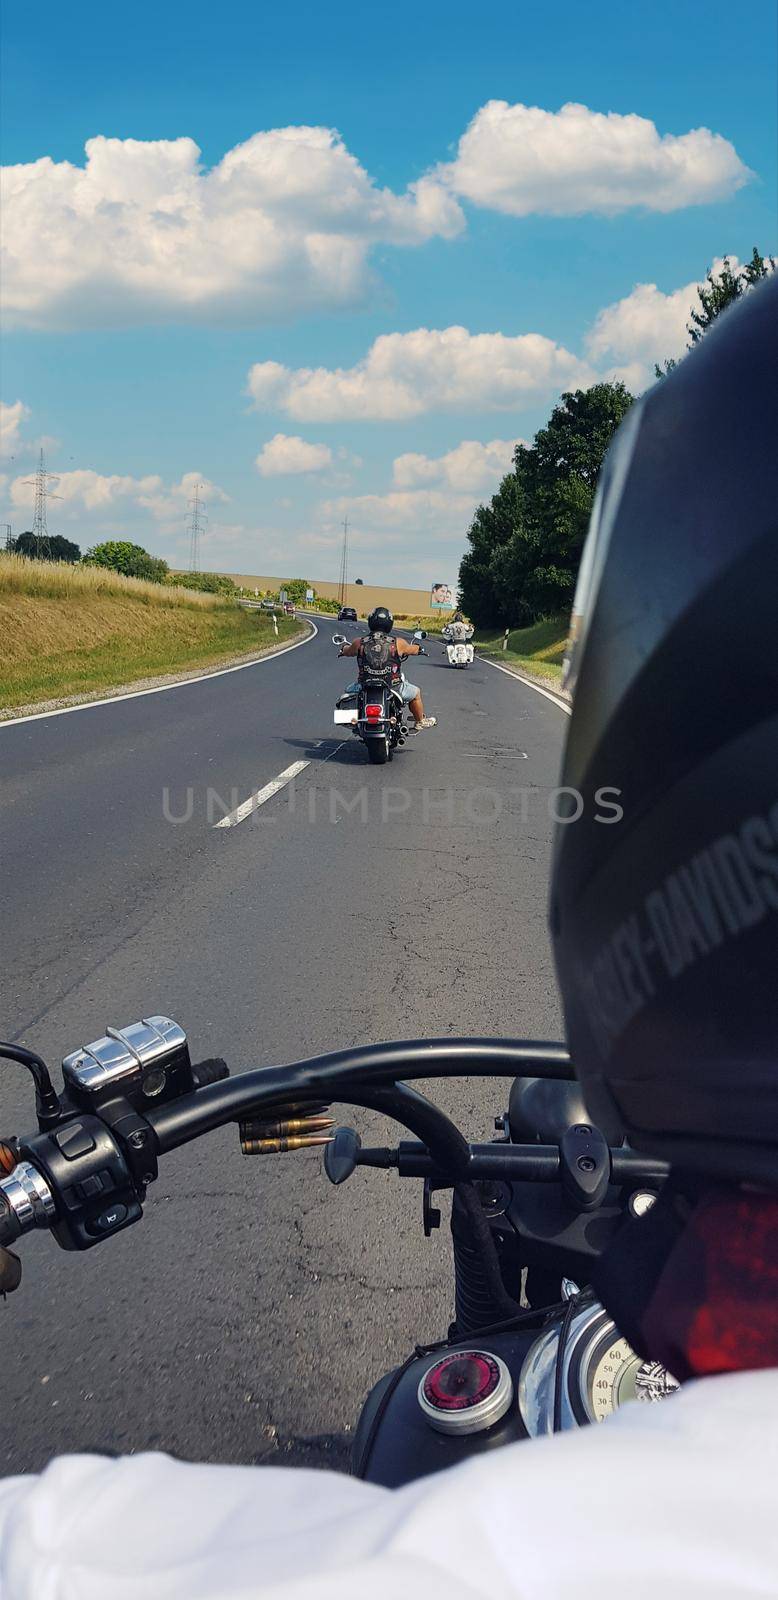 Snapshoot while riding a motorcycle on the road, blue sky by banate